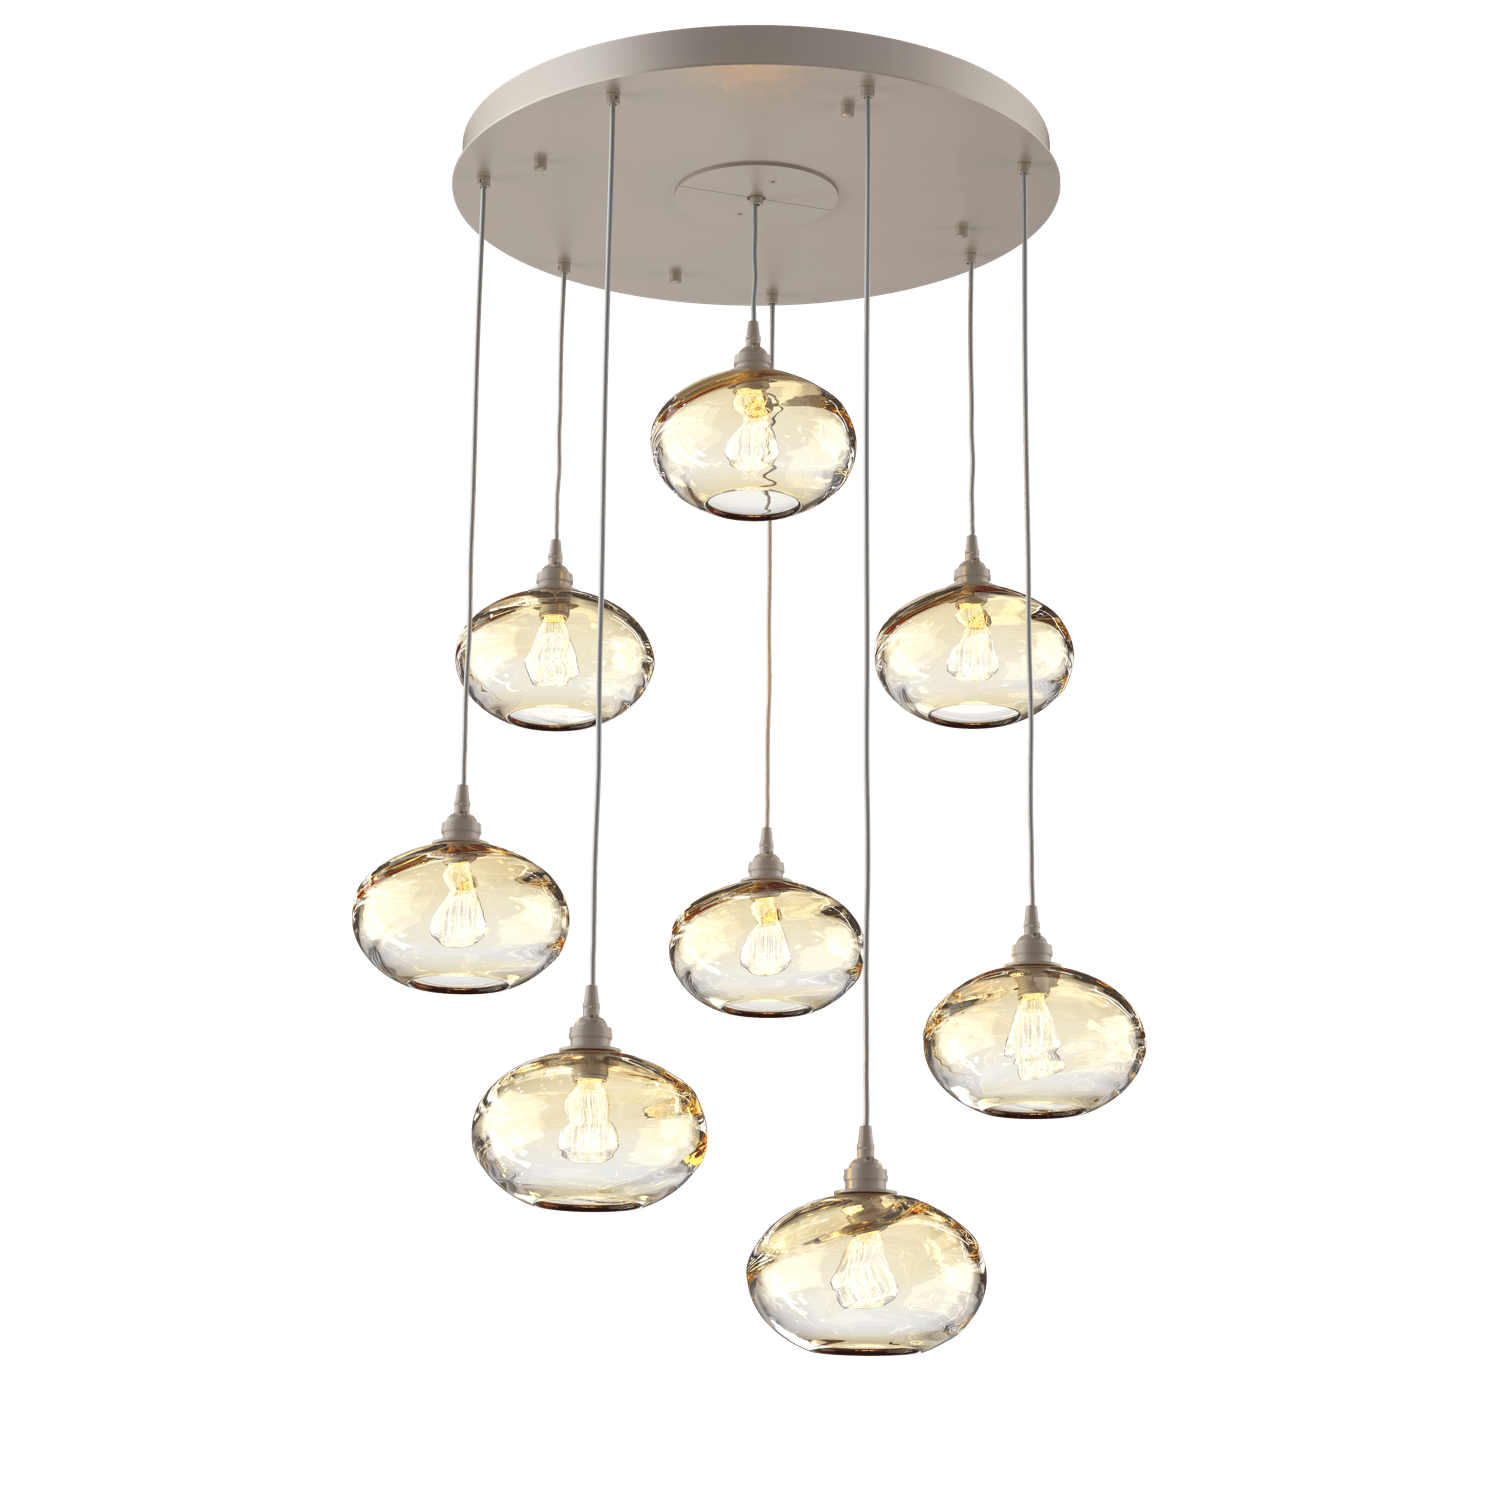 CHB0036-08-BS-OA-Hammerton-Studio-Optic-Blown-Glass-Coppa-8-light-round-pendant-chandelier-with-metallic-beige-silver-finish-and-optic-amber-blown-glass-shades-and-incandescent-lamping